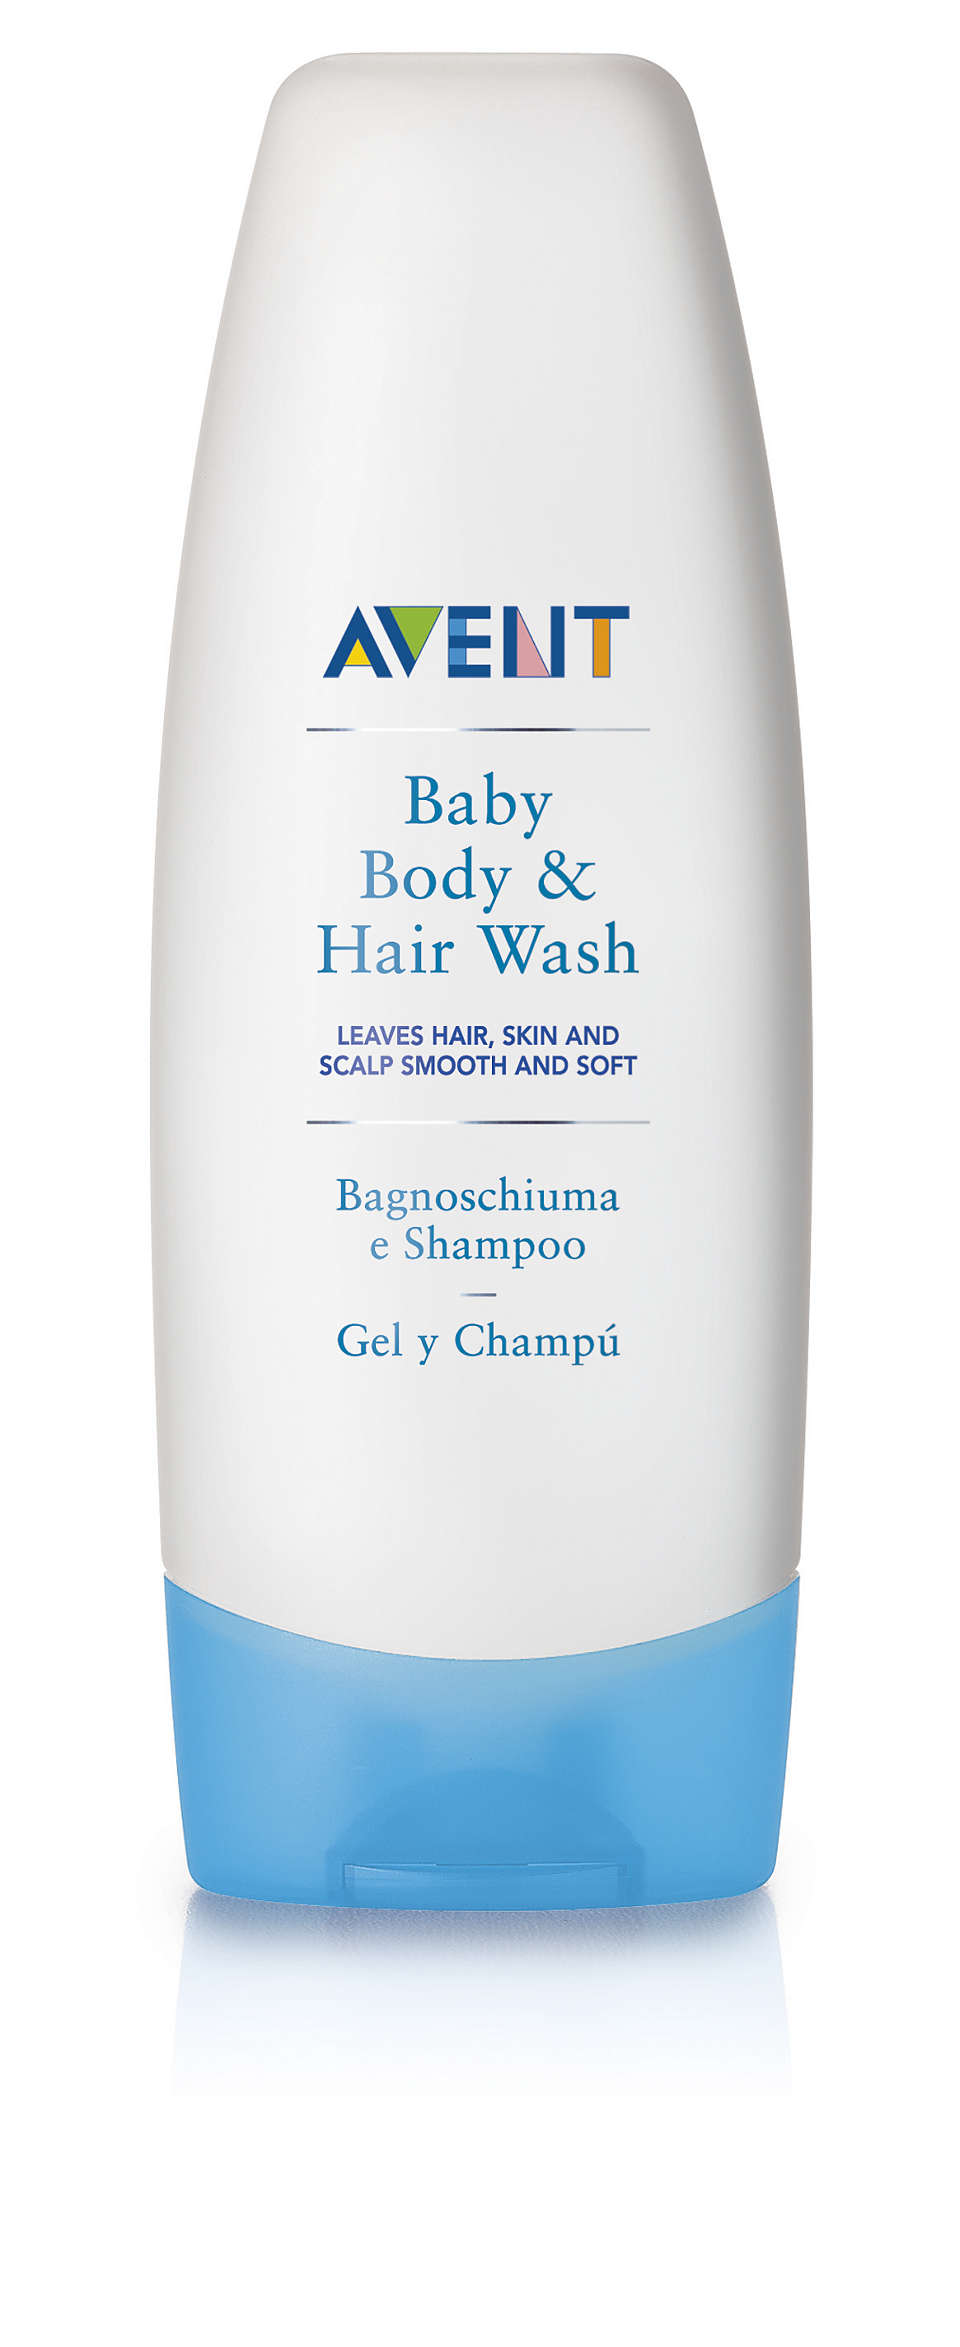 Leaves hair, skin and scalp smooth and soft